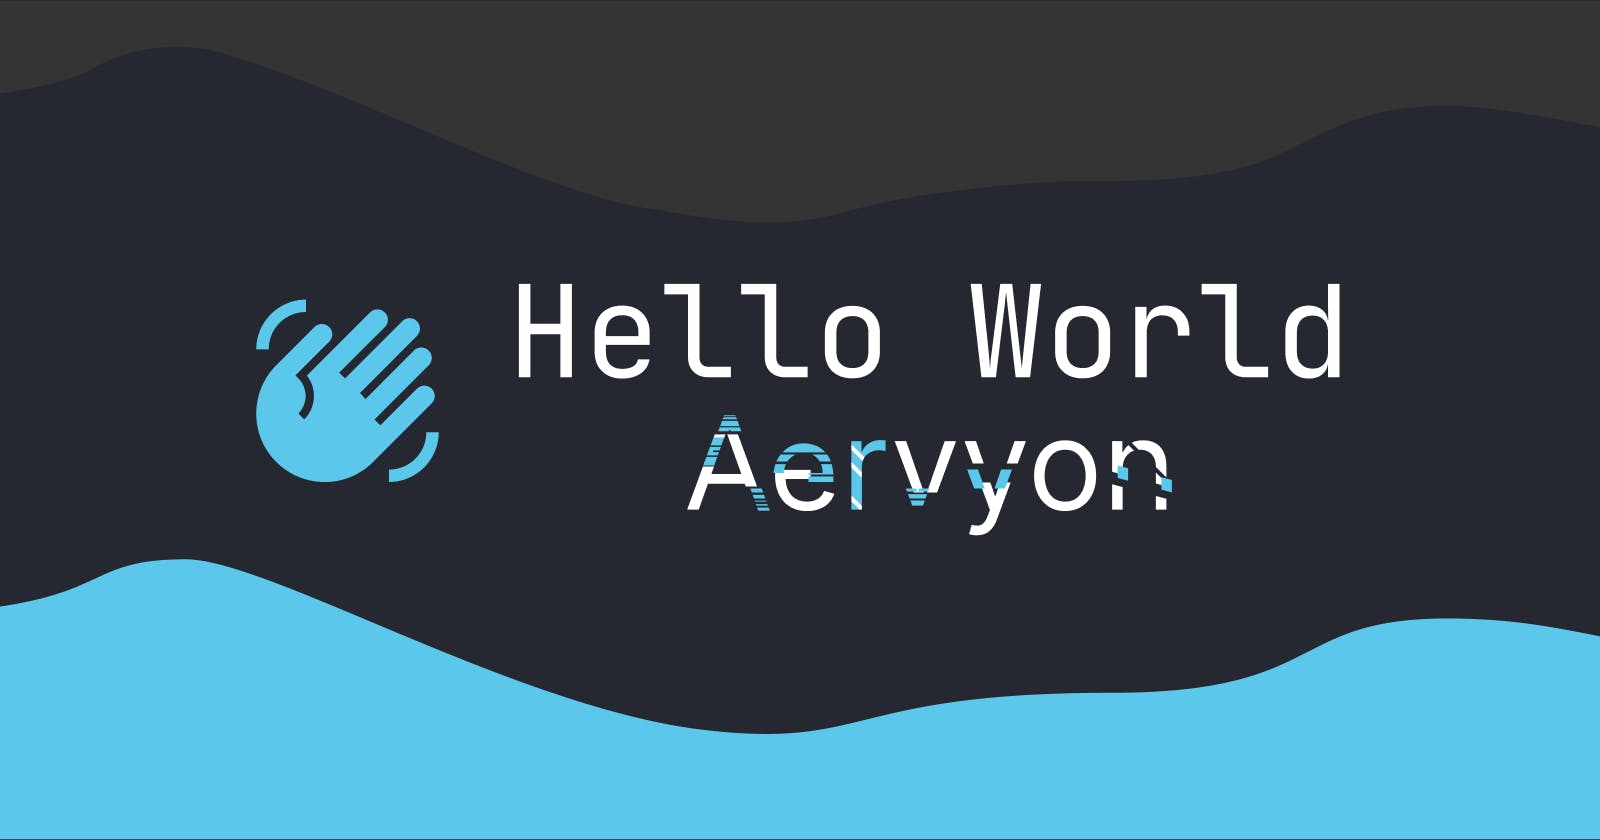 Welcome to A Glimpse of Aervyon